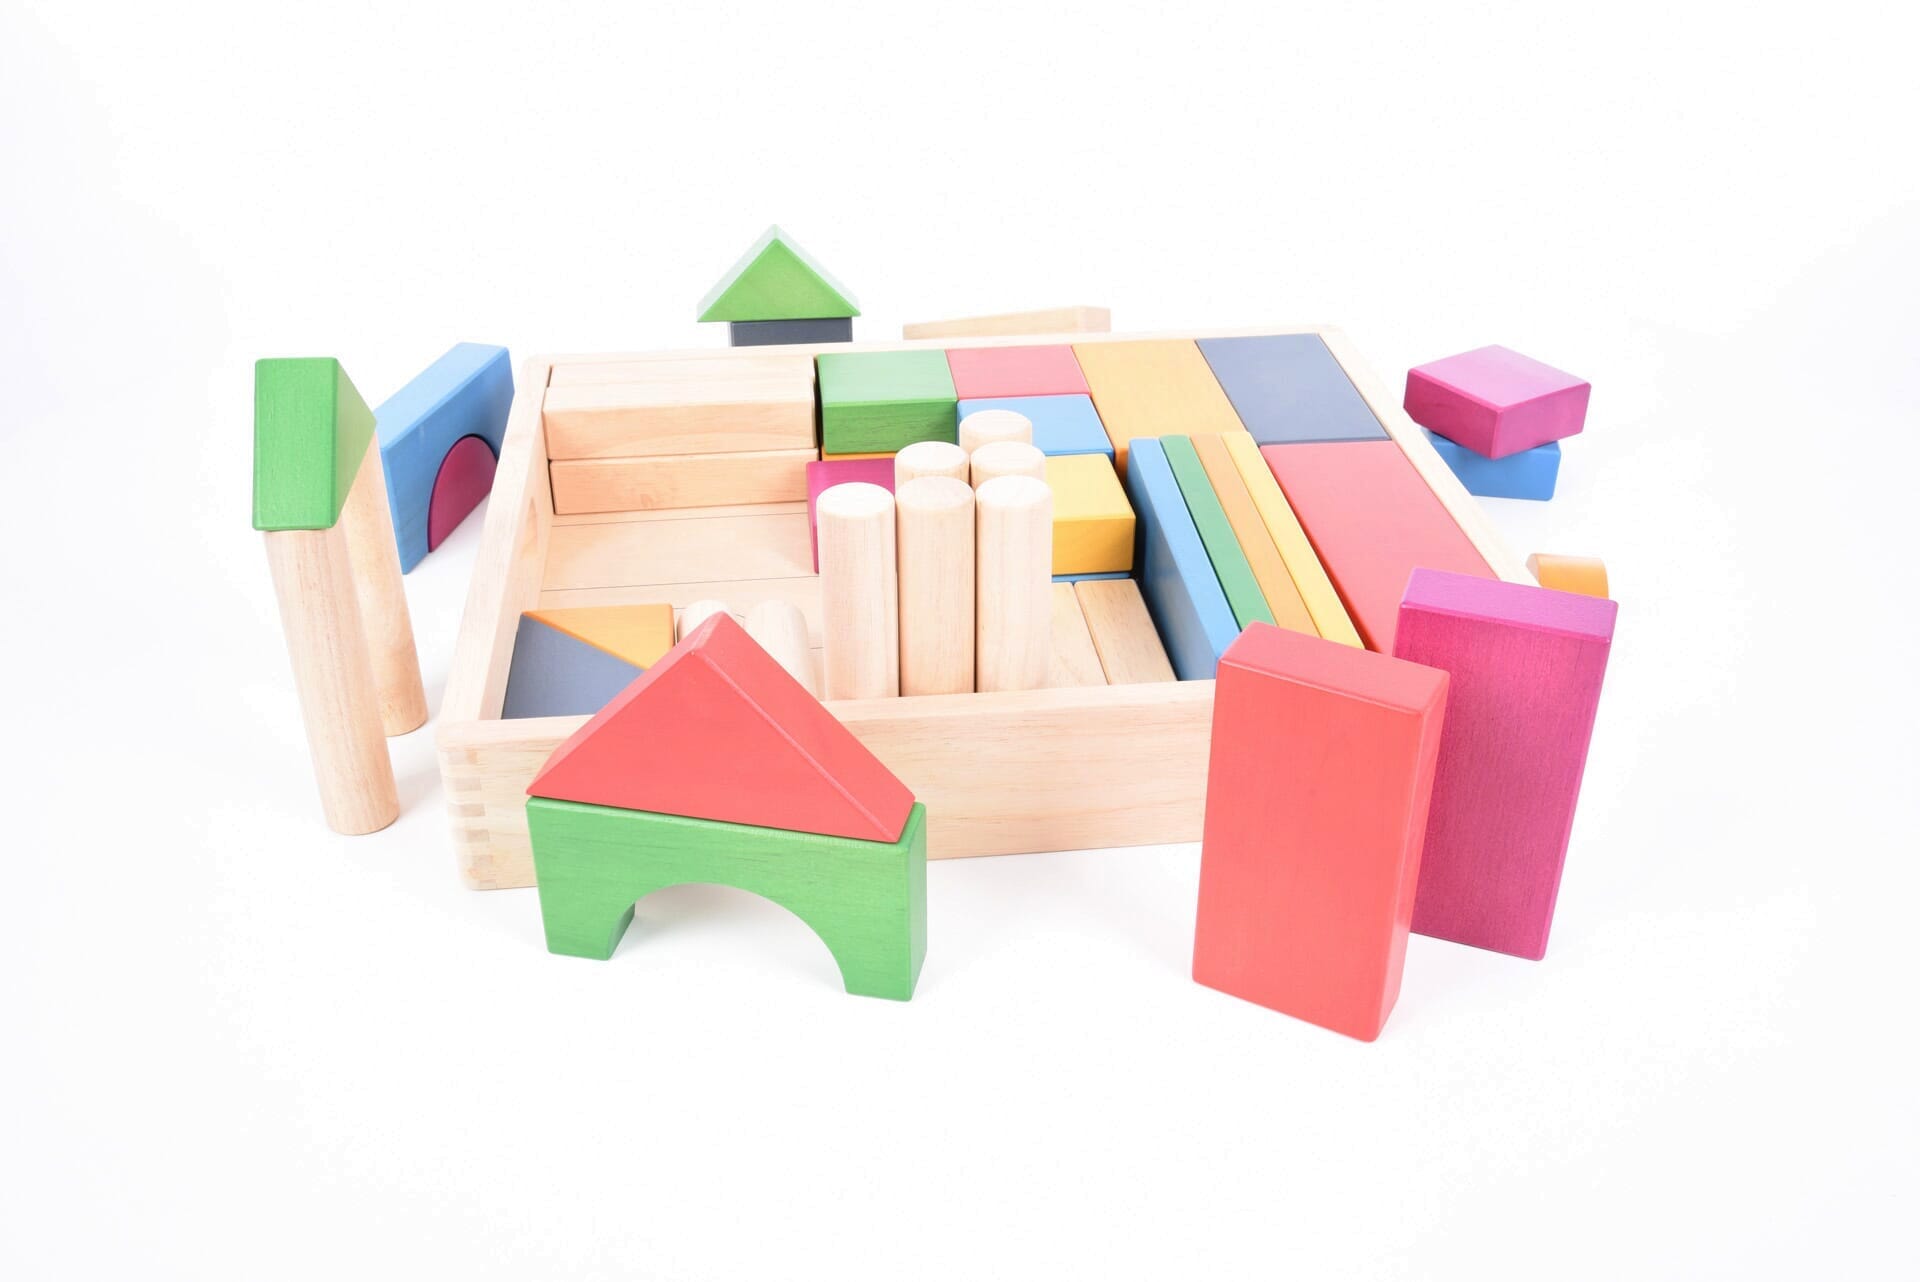 TickiT Rainbow Wooden Jumbo Block Set, Our TickiT® Rainbow Wooden Jumbo Block Set is a beautiful selection of 54 solid wooden blocks in a mixture of natural and attractive rainbow colours. The TickiT Rainbow Wooden Jumbo Block Set are safe and smooth traditional shapes for construction play. The TickiT Rainbow Wooden Jumbo Block Set are the perfect size for small hands to build impressive towers and structures, whilst developing your child's fine motor skills and enabling imaginative play. The TickiT Rainbo